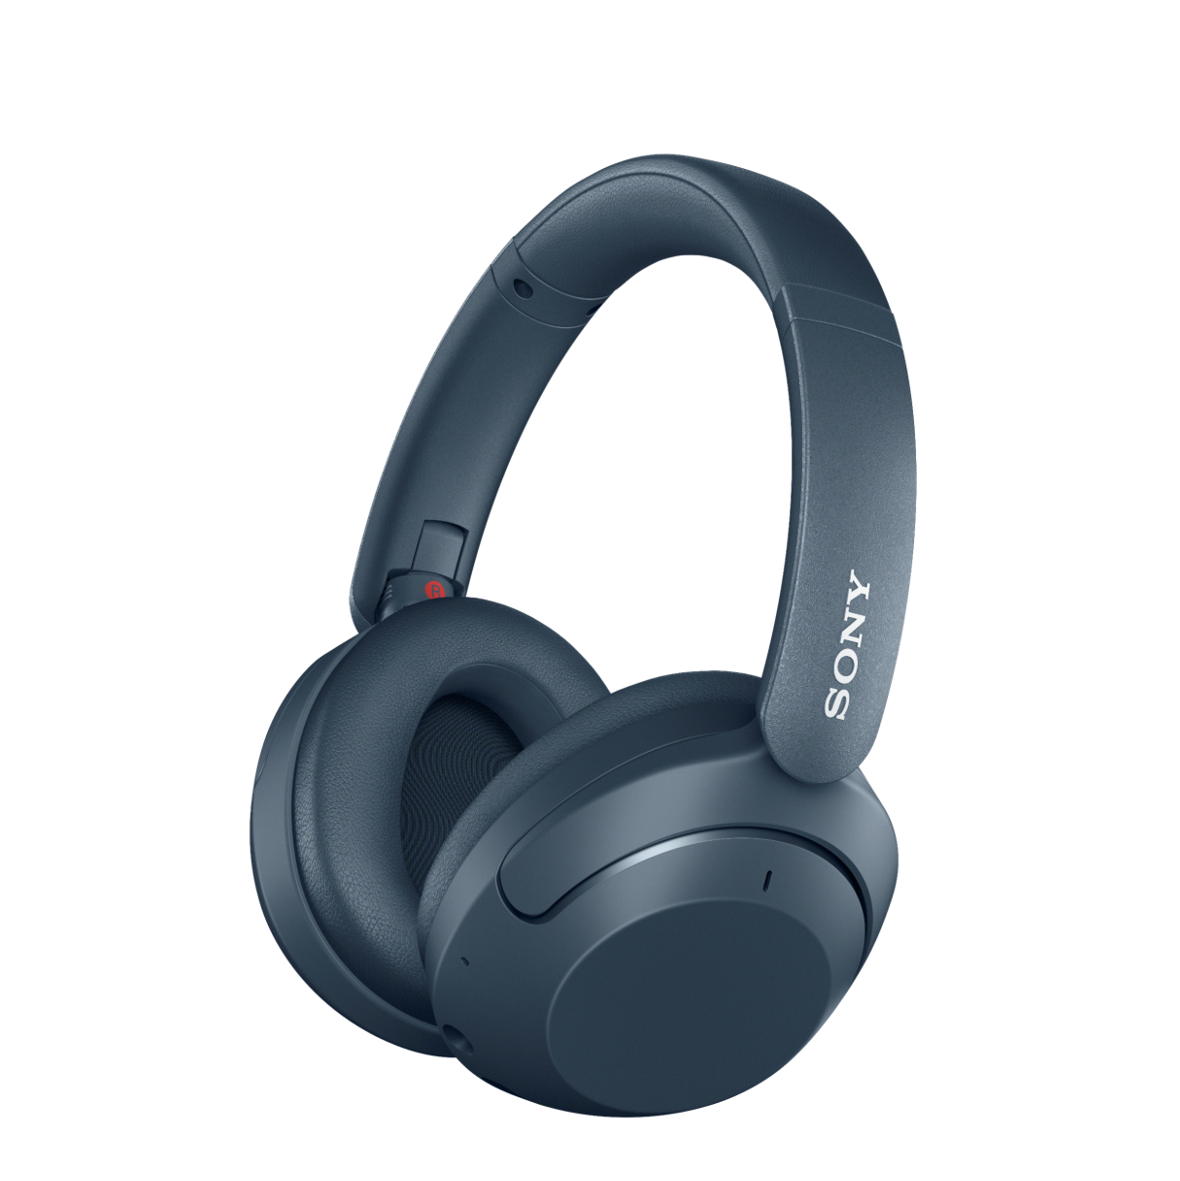 WH-XB910N EXTRA BASS™Wireless Noise-Cancelling Headphones